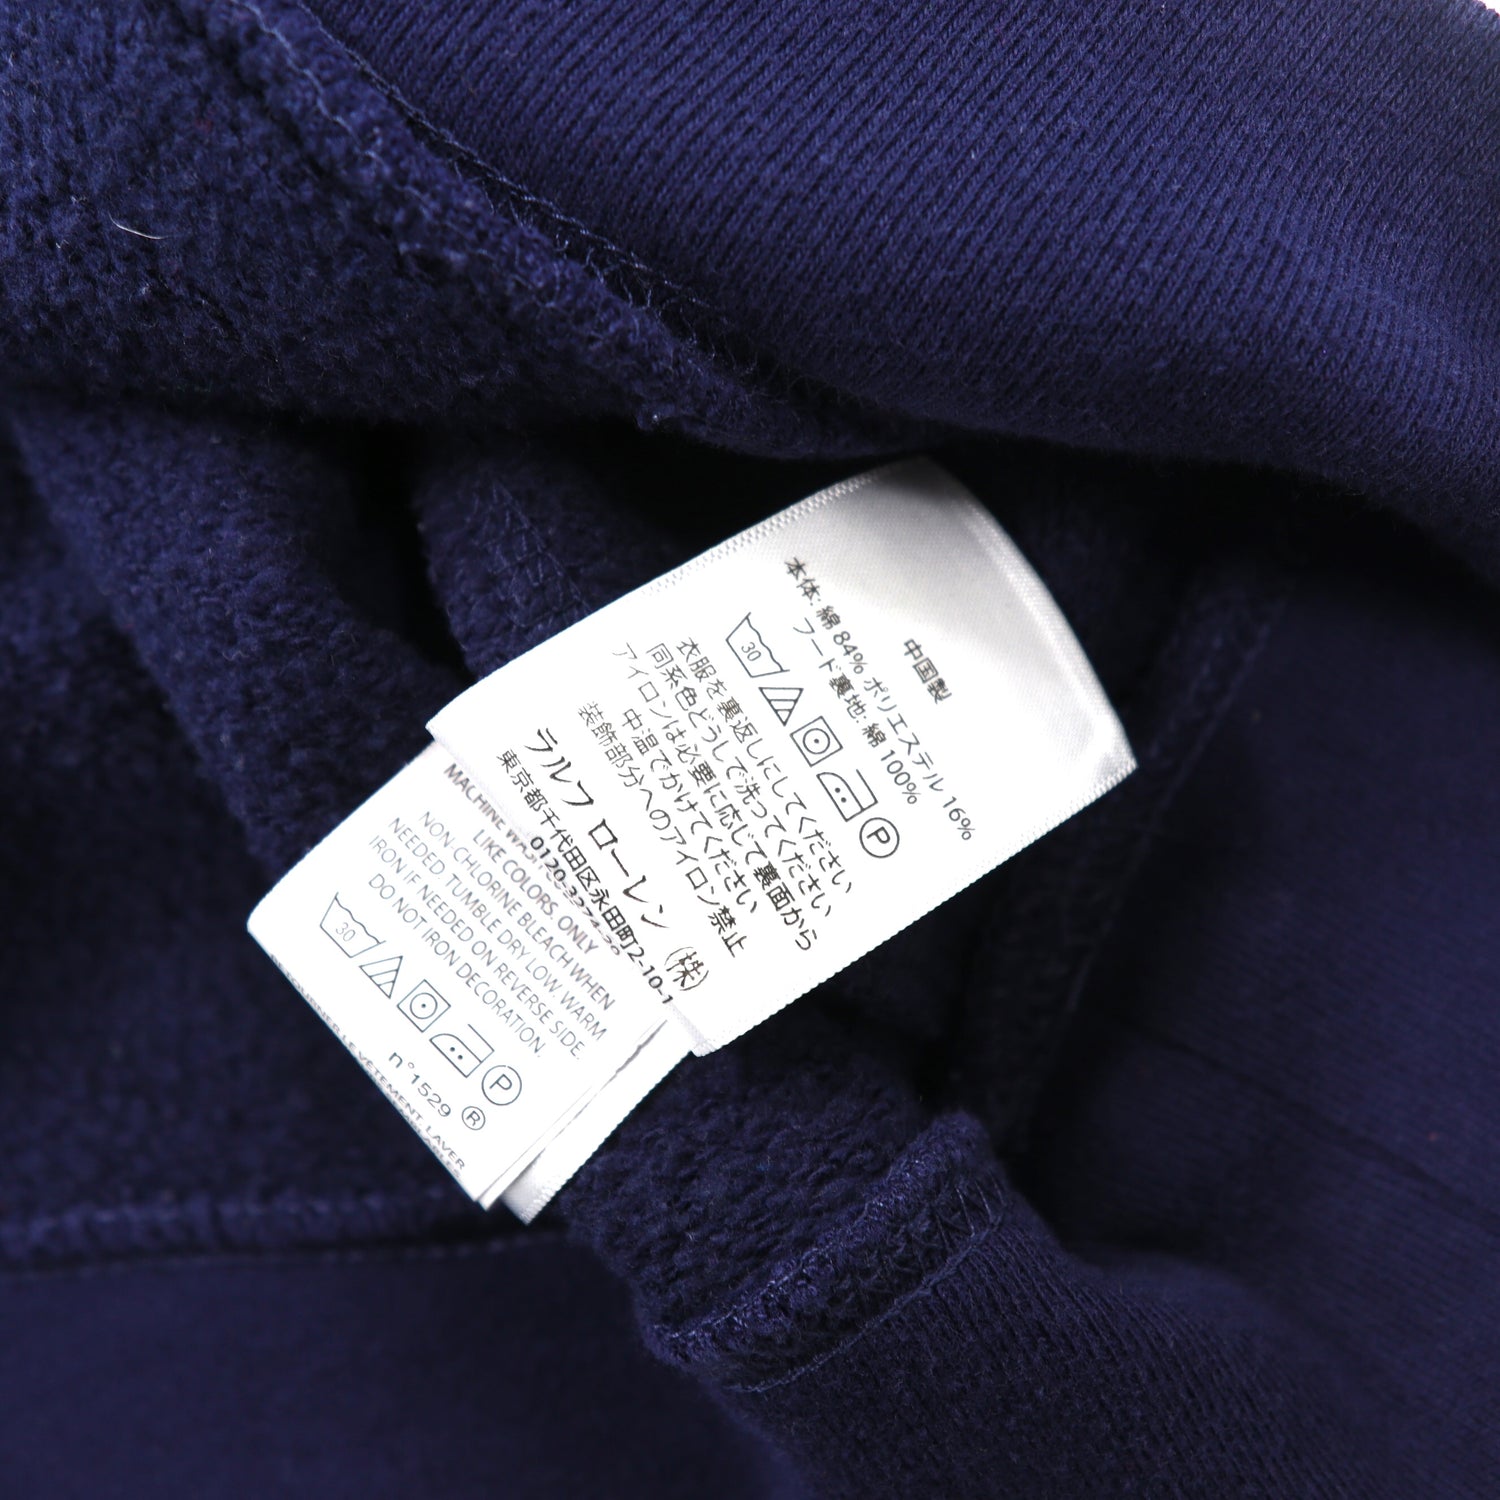 POLO RALPH LAUREN HOODIE XL Navy Cotton Brushed Lining Previous V 